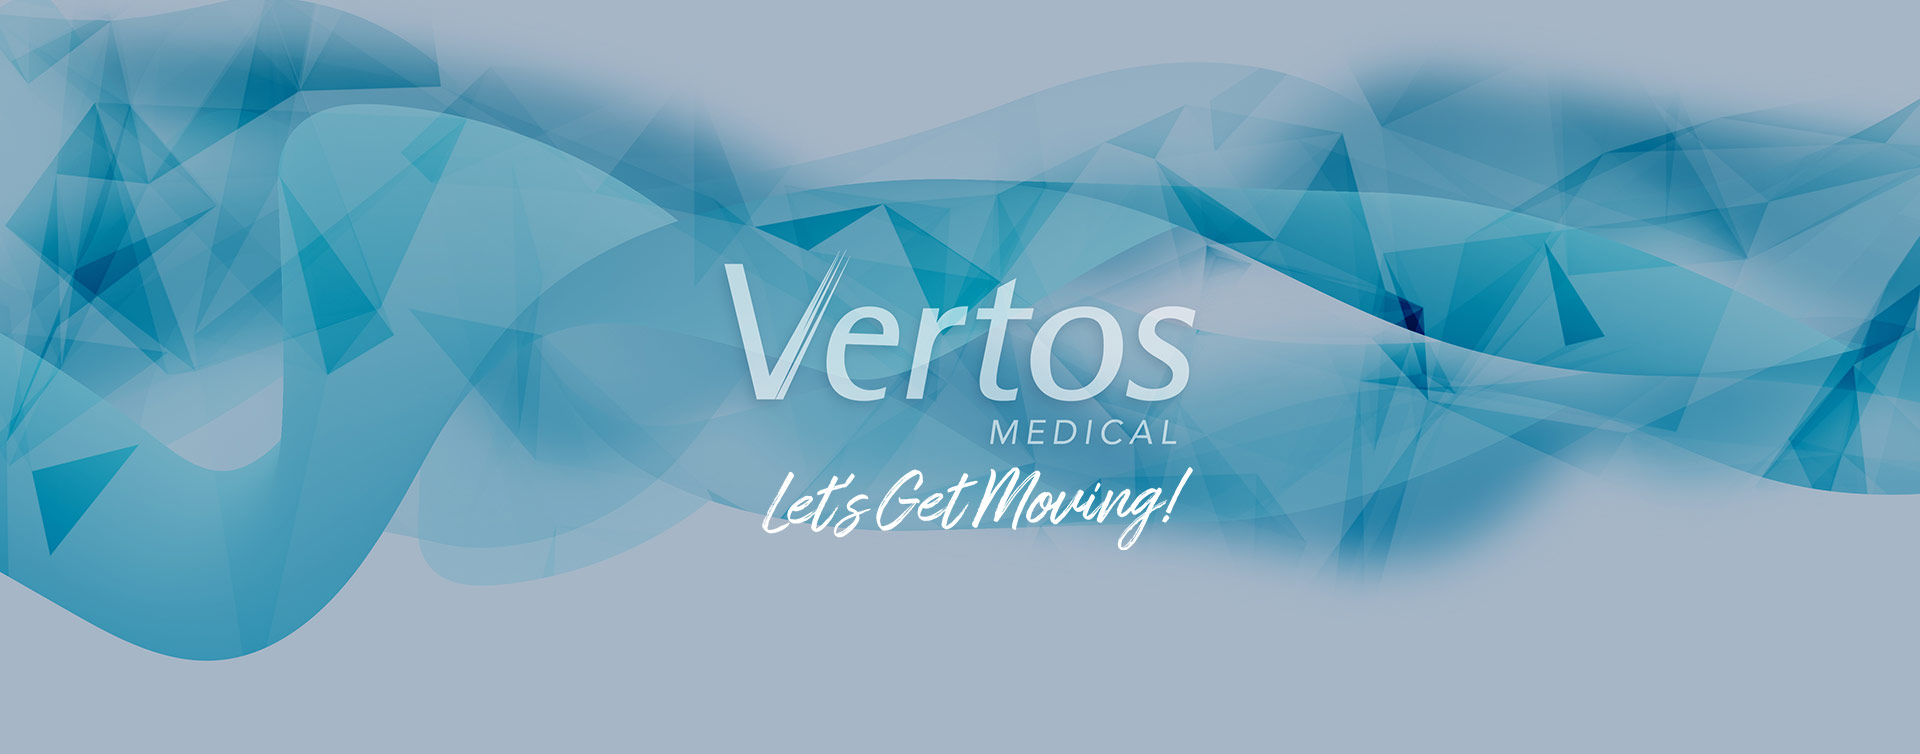 Logo of Vertos Medical, Let's Get Moving! with blue and white crystal background